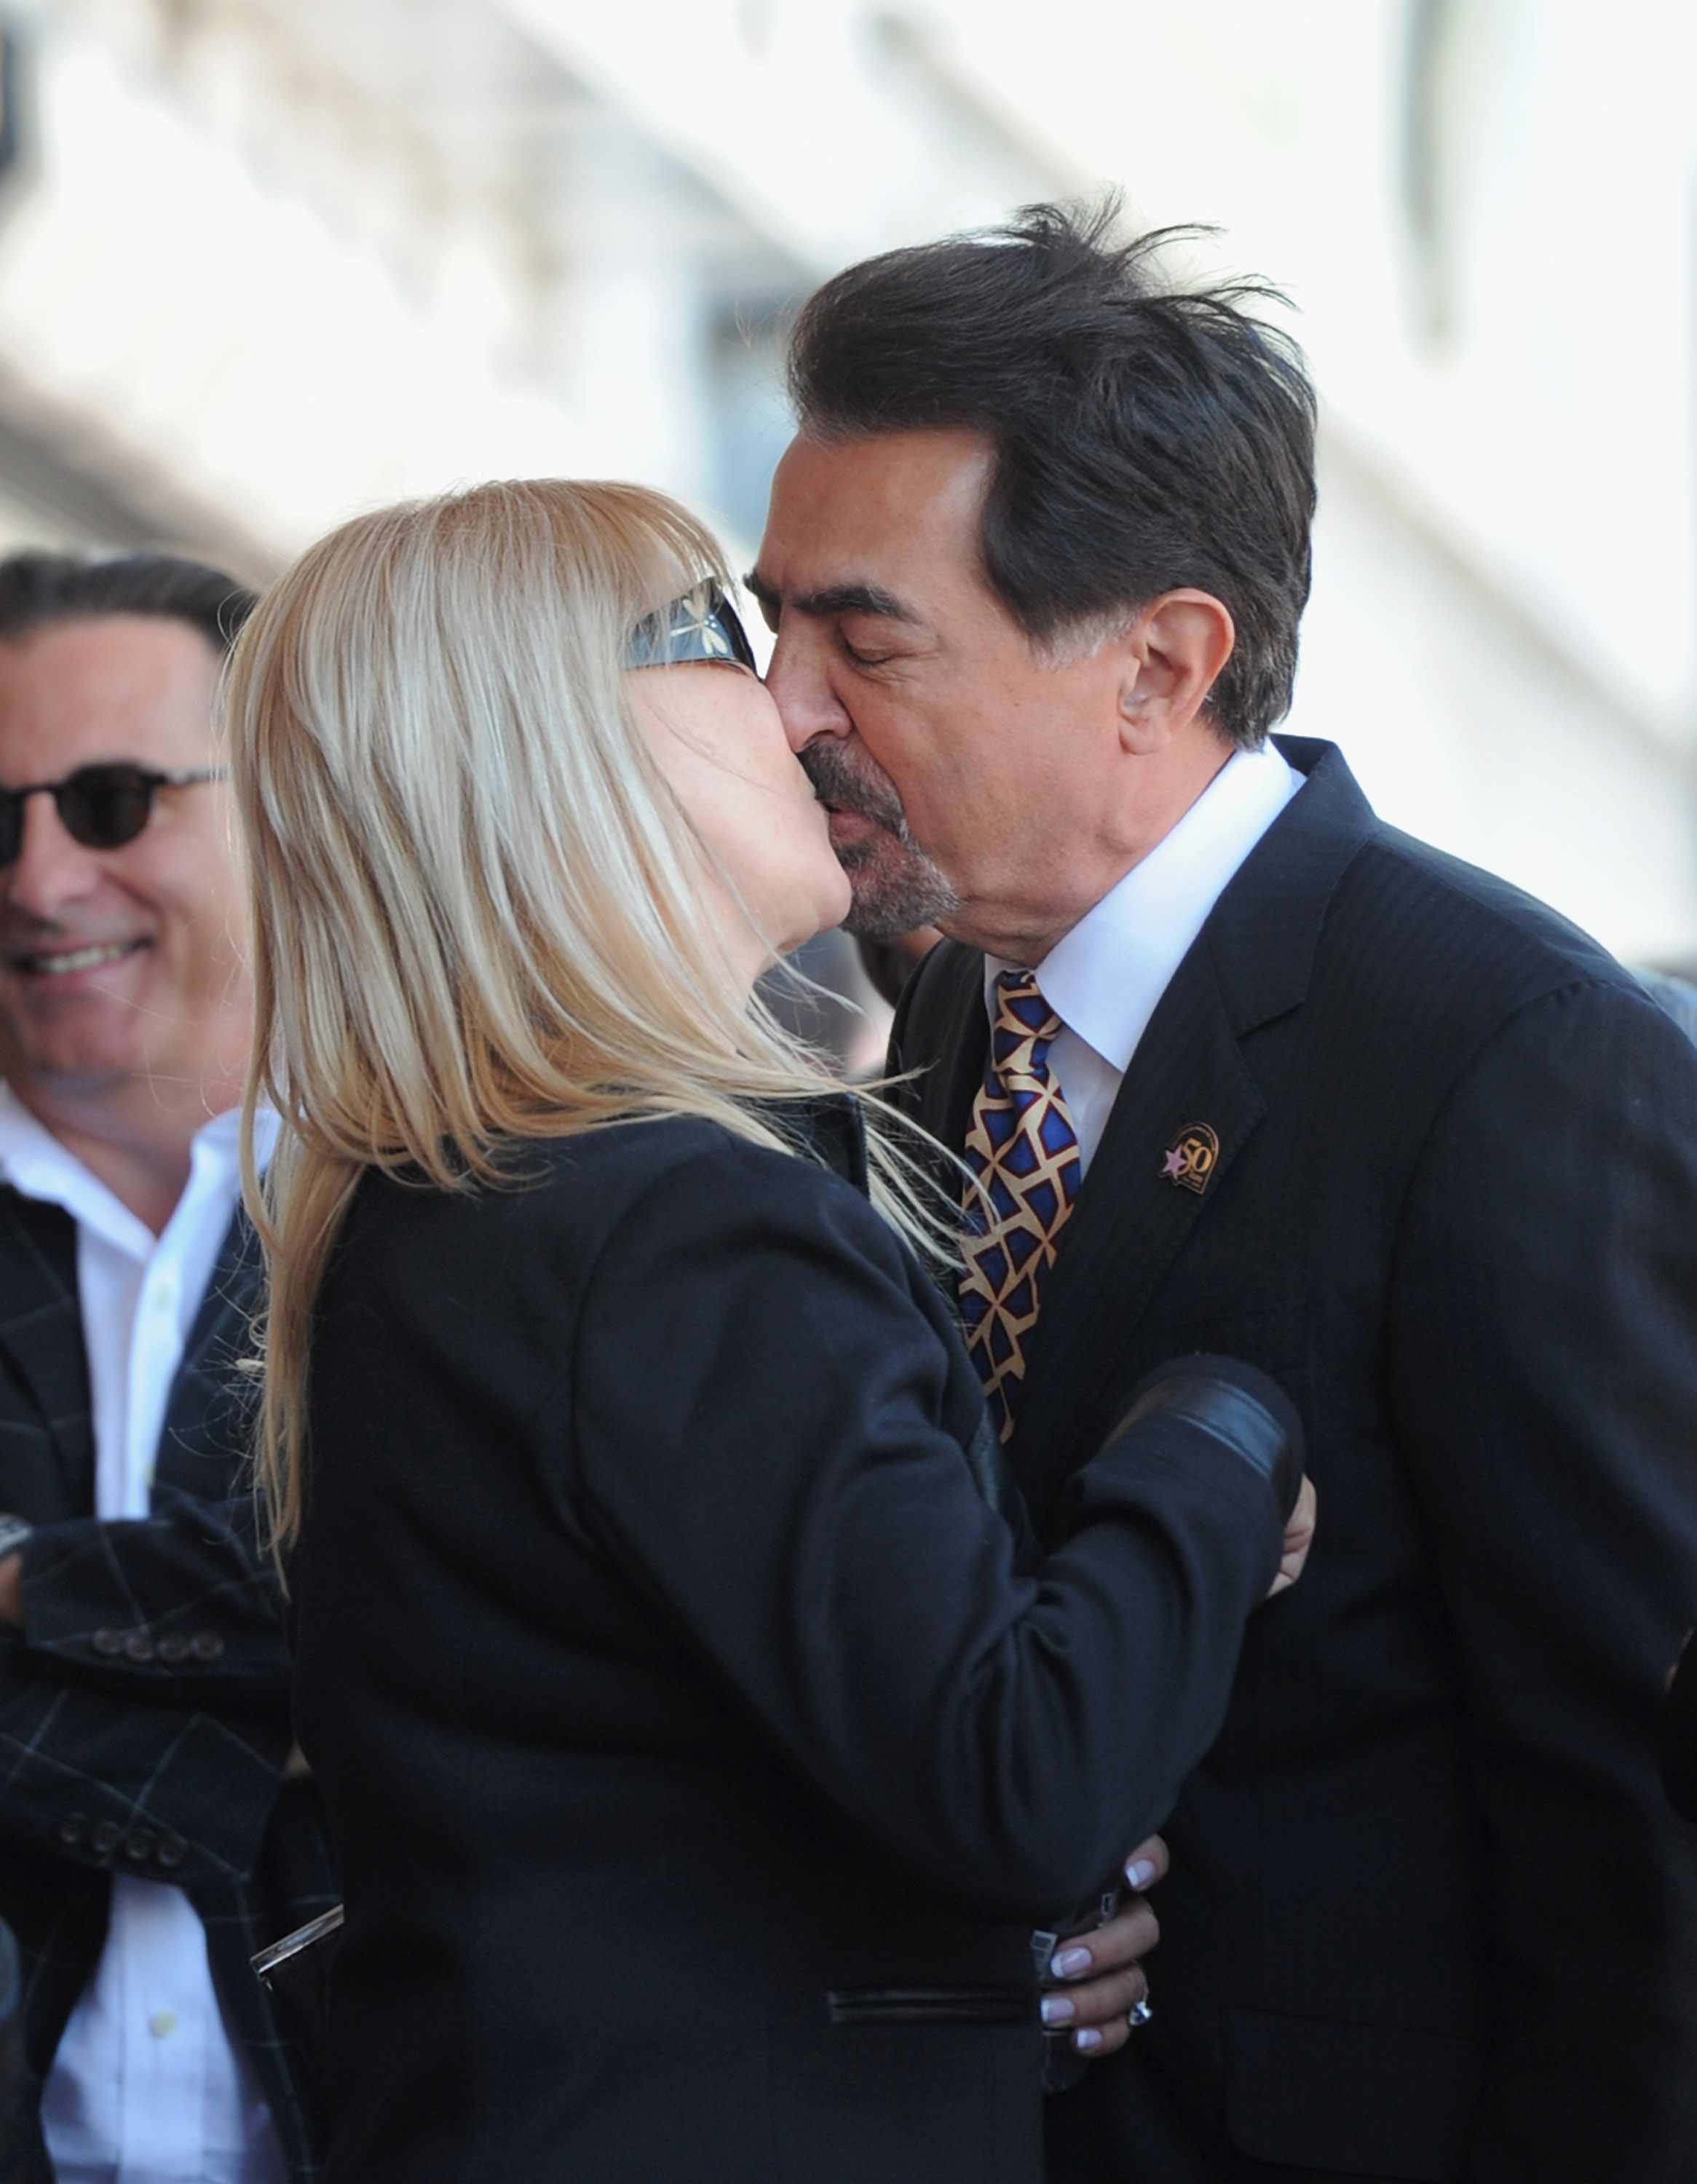 Arlene Vhrel and Joe Mantegna at his Hollywood Walk of Fame star ceremony in Hollywood, California on April 29, 2011 | Source: Getty Images